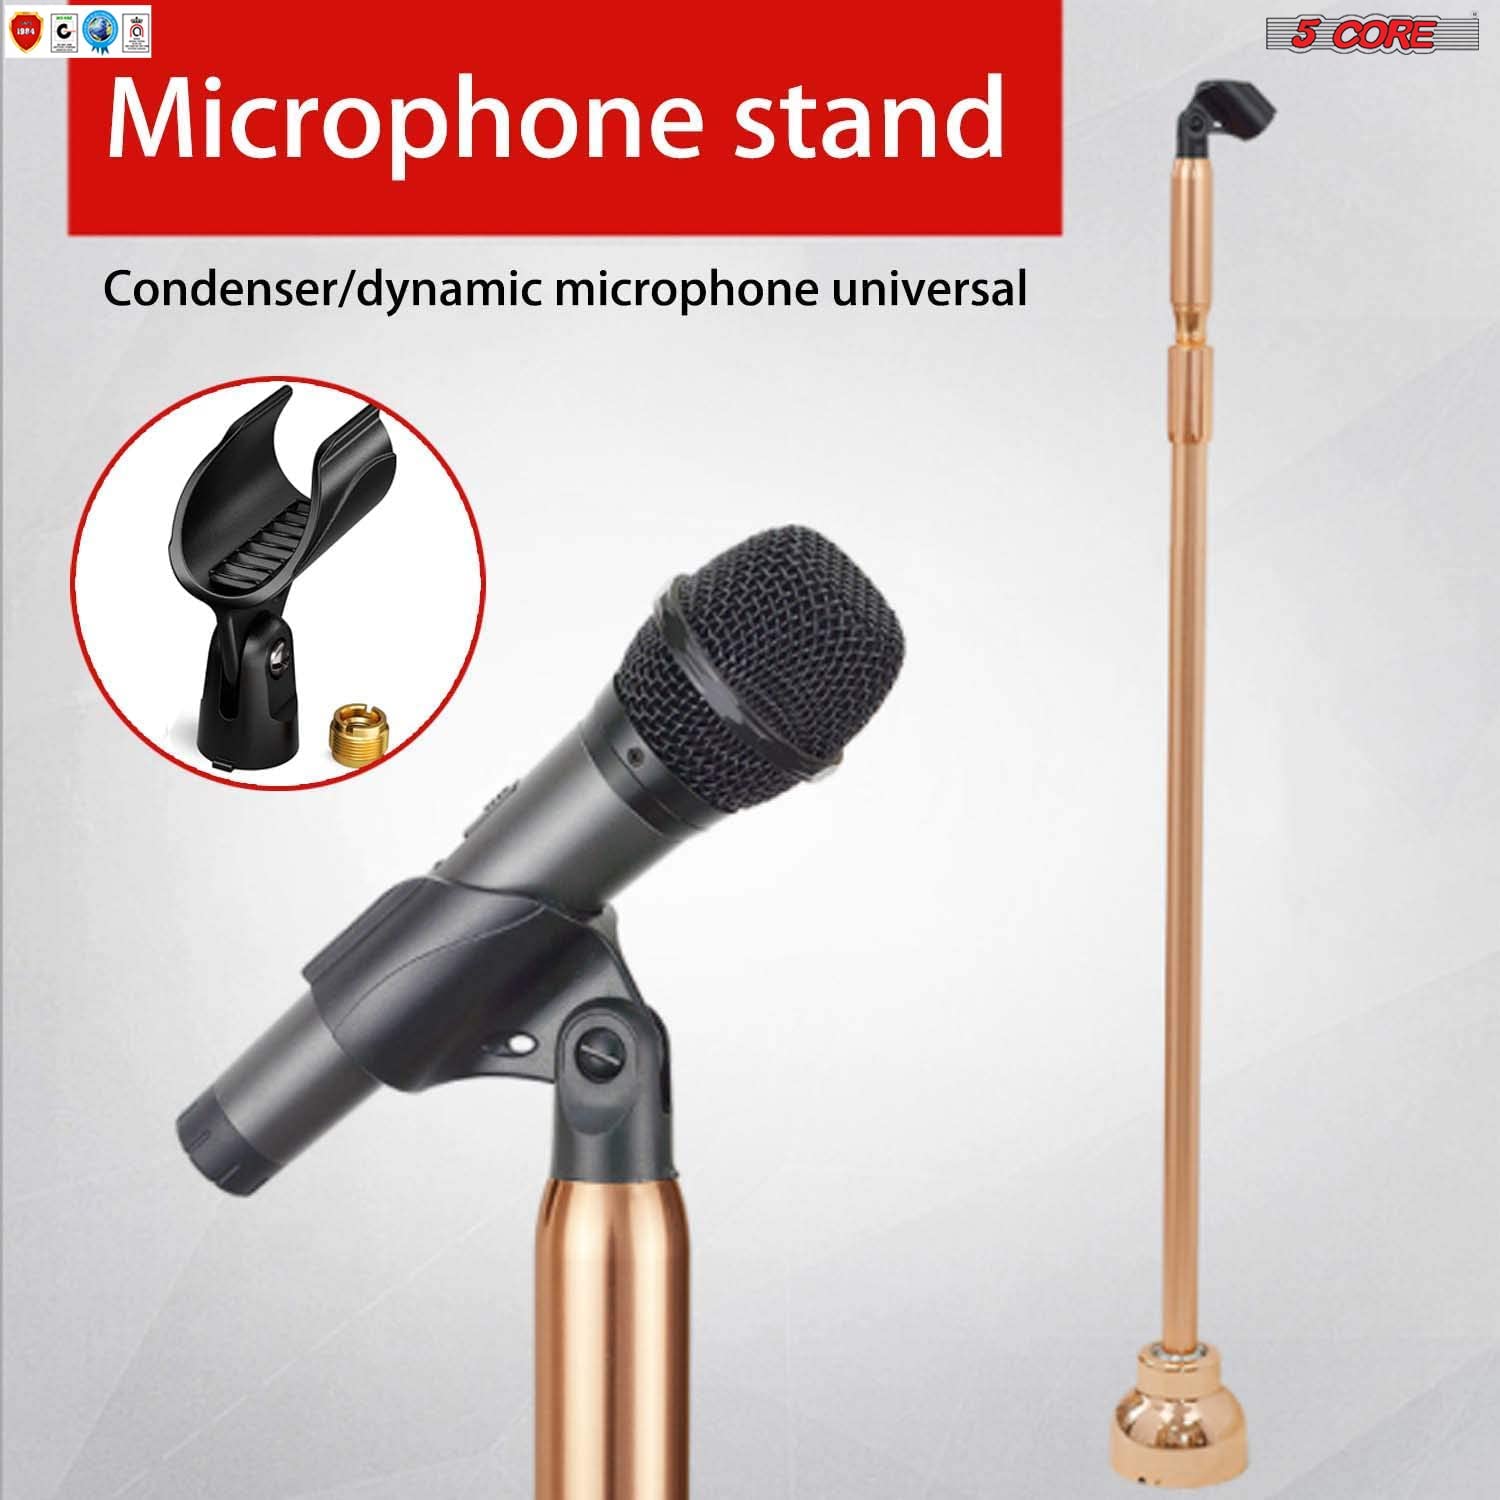 5 Core Microphone Clip Holder for Mic Stand Universal Adjustable Mic Clip Suitable for Handheld Microphones MC 05 2PCS